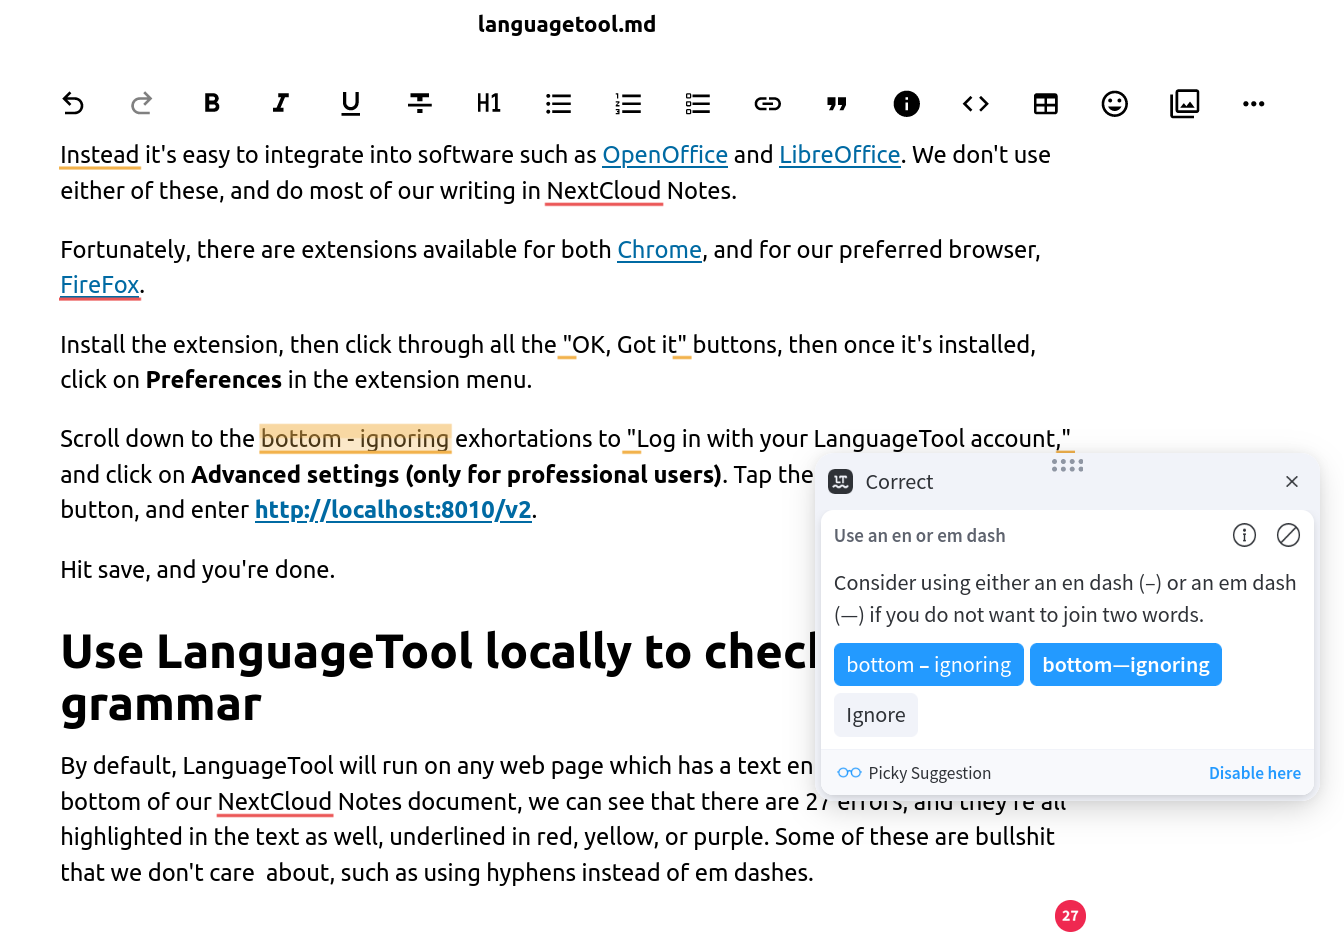 Self-hosted LanguageTool extension running in NextCloud notes